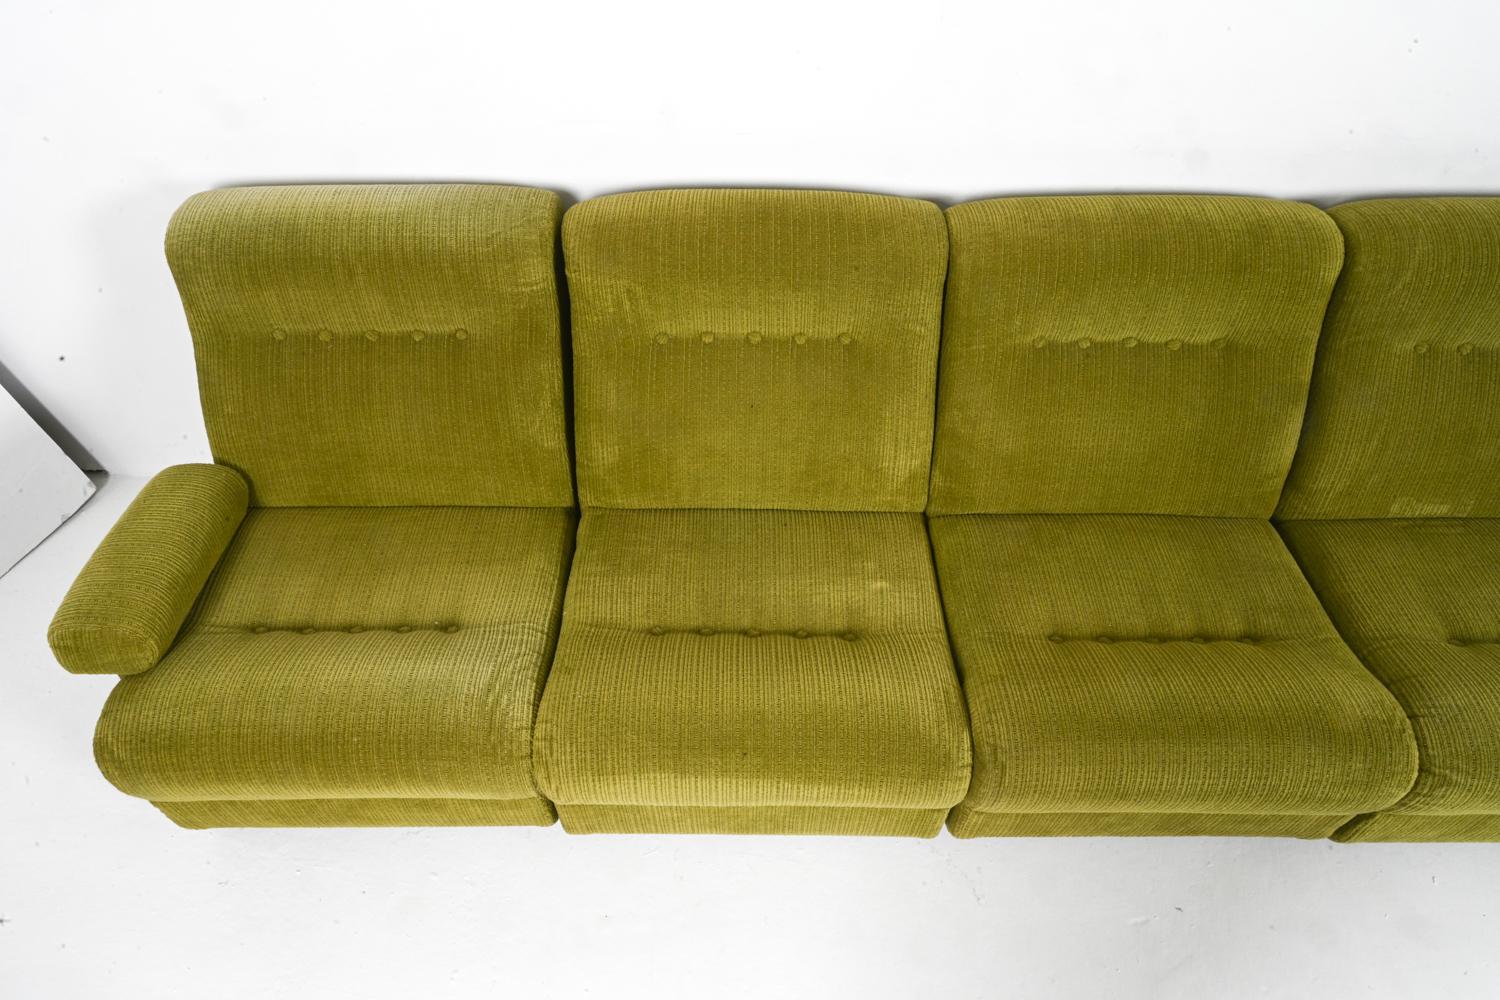 1970's Space Age Modular Sectional Sofa in Corded Sheared Boucle In Good Condition For Sale In Norwalk, CT